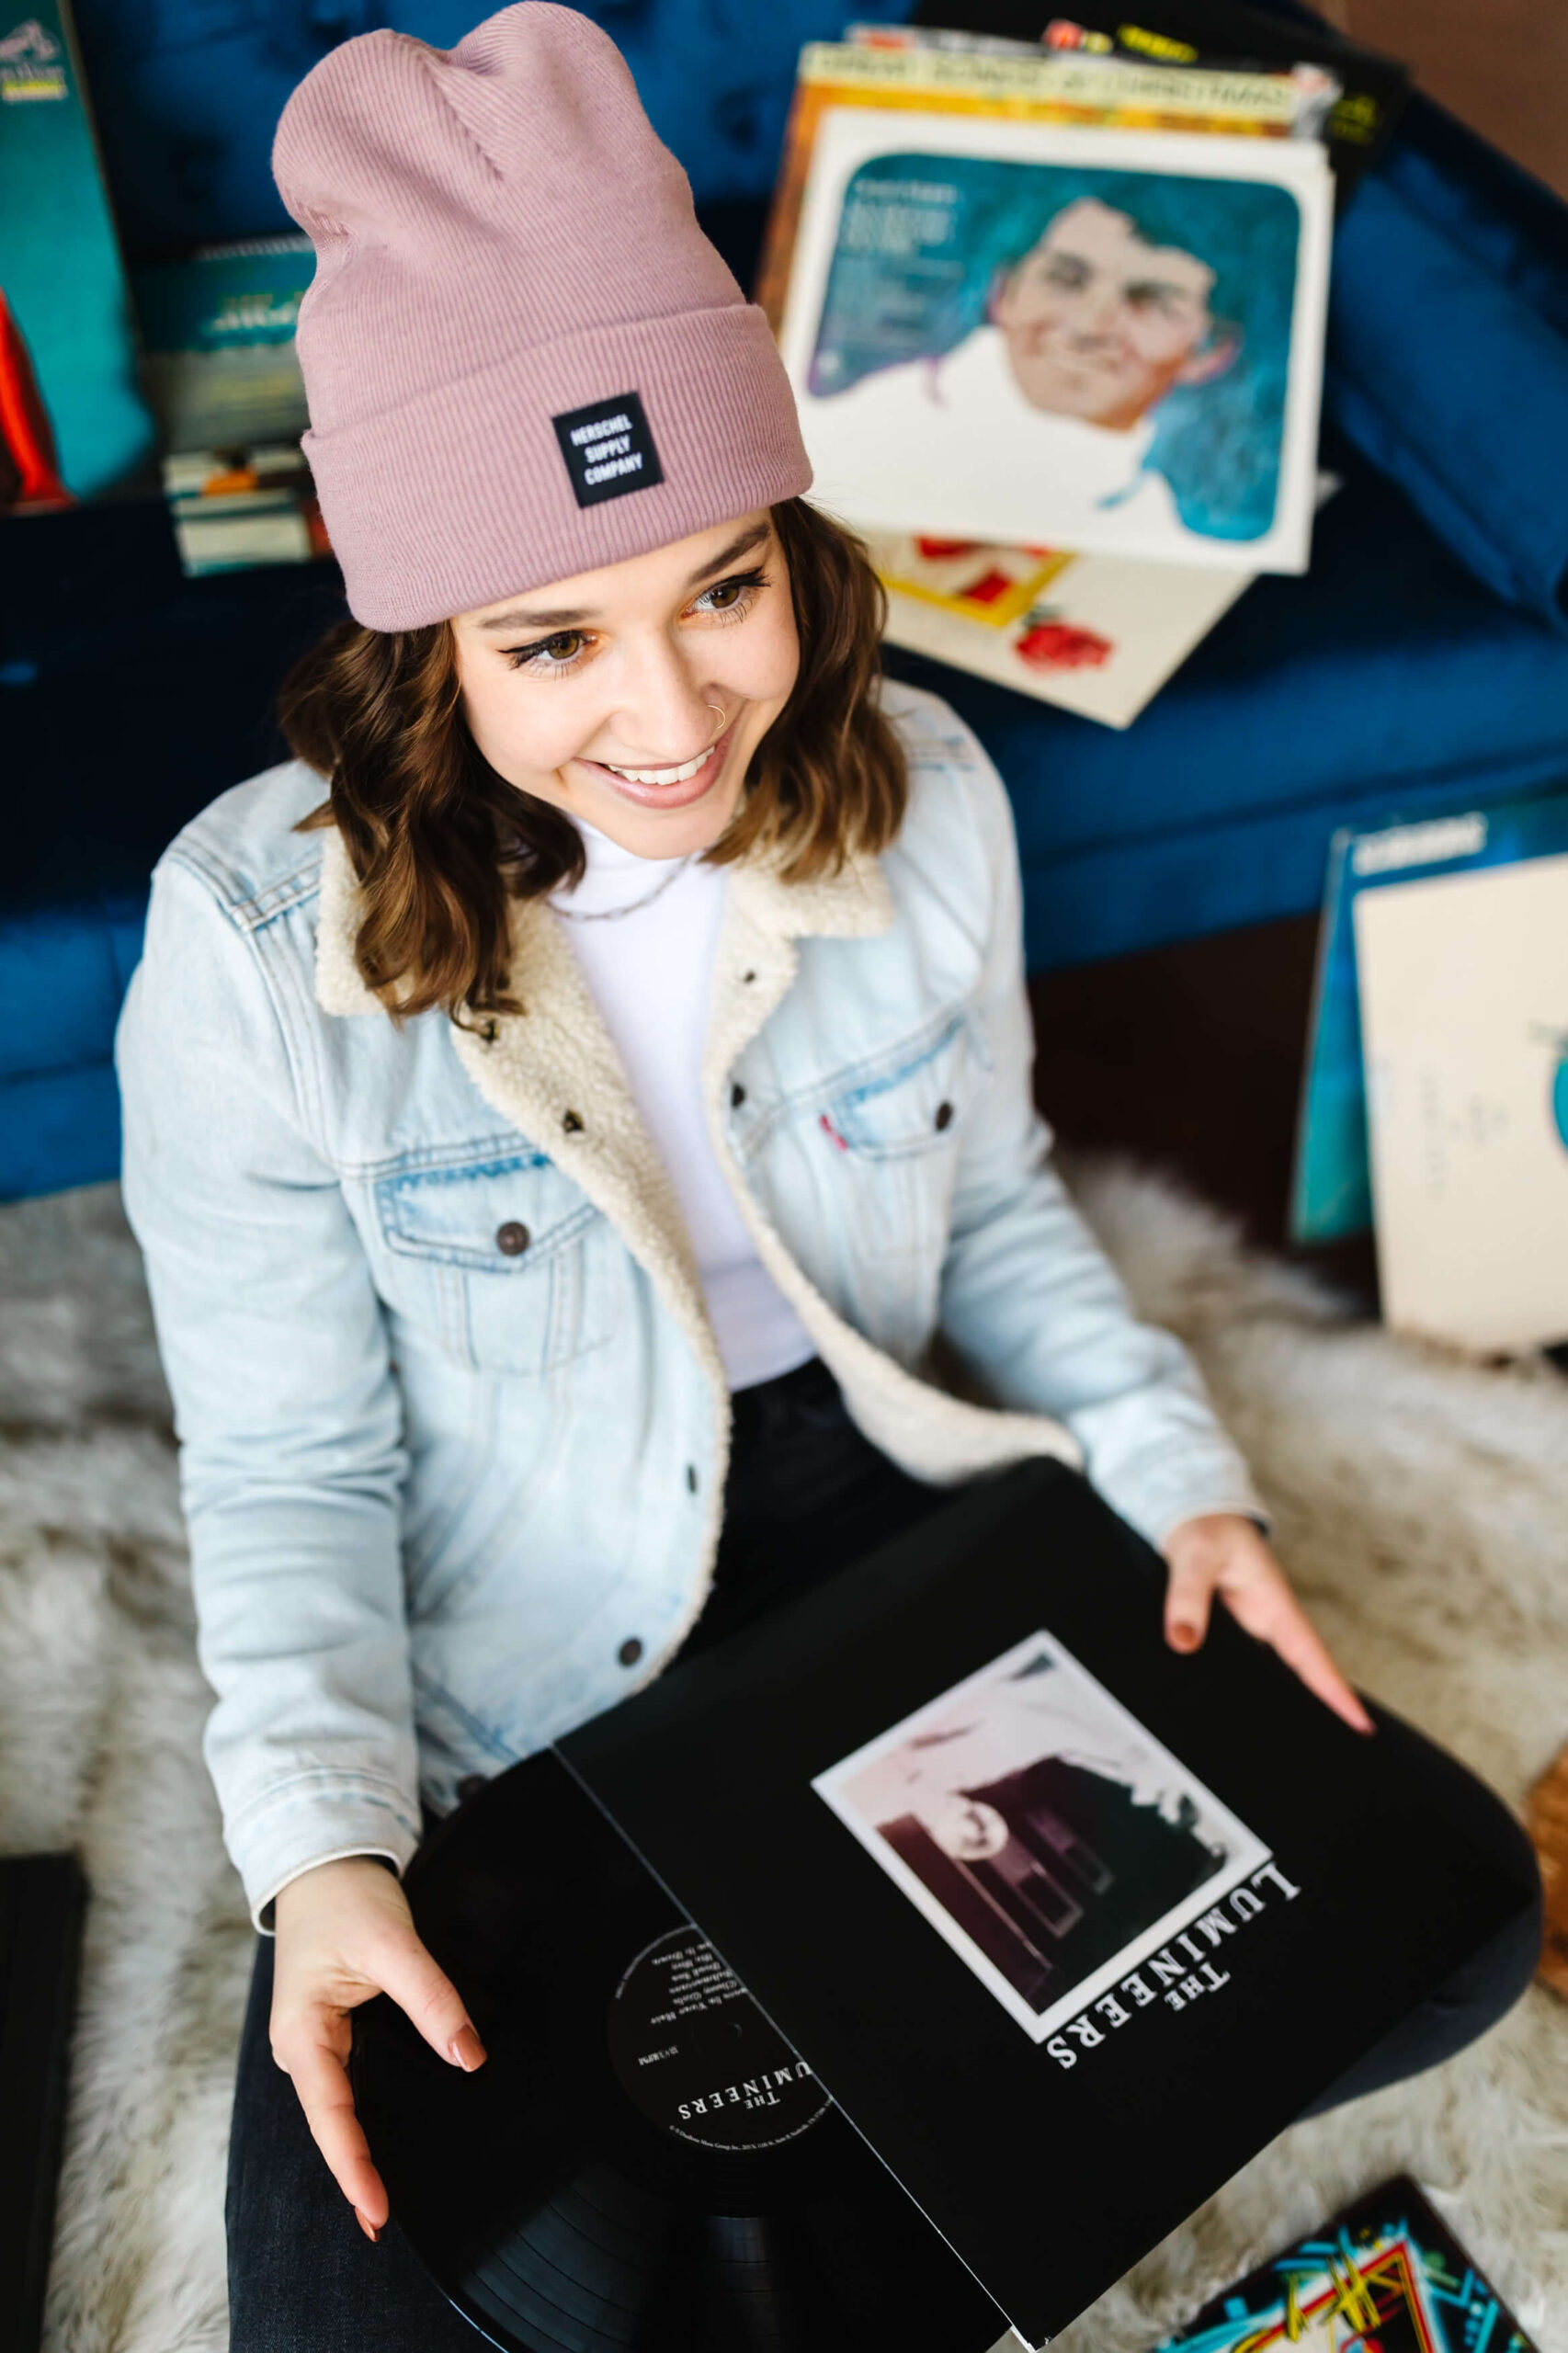 girl wearing pink beanie, blue jean jacket sitting in front of blue velvet couch taking a vinyl record album out of its cover during senior studio photoshoot